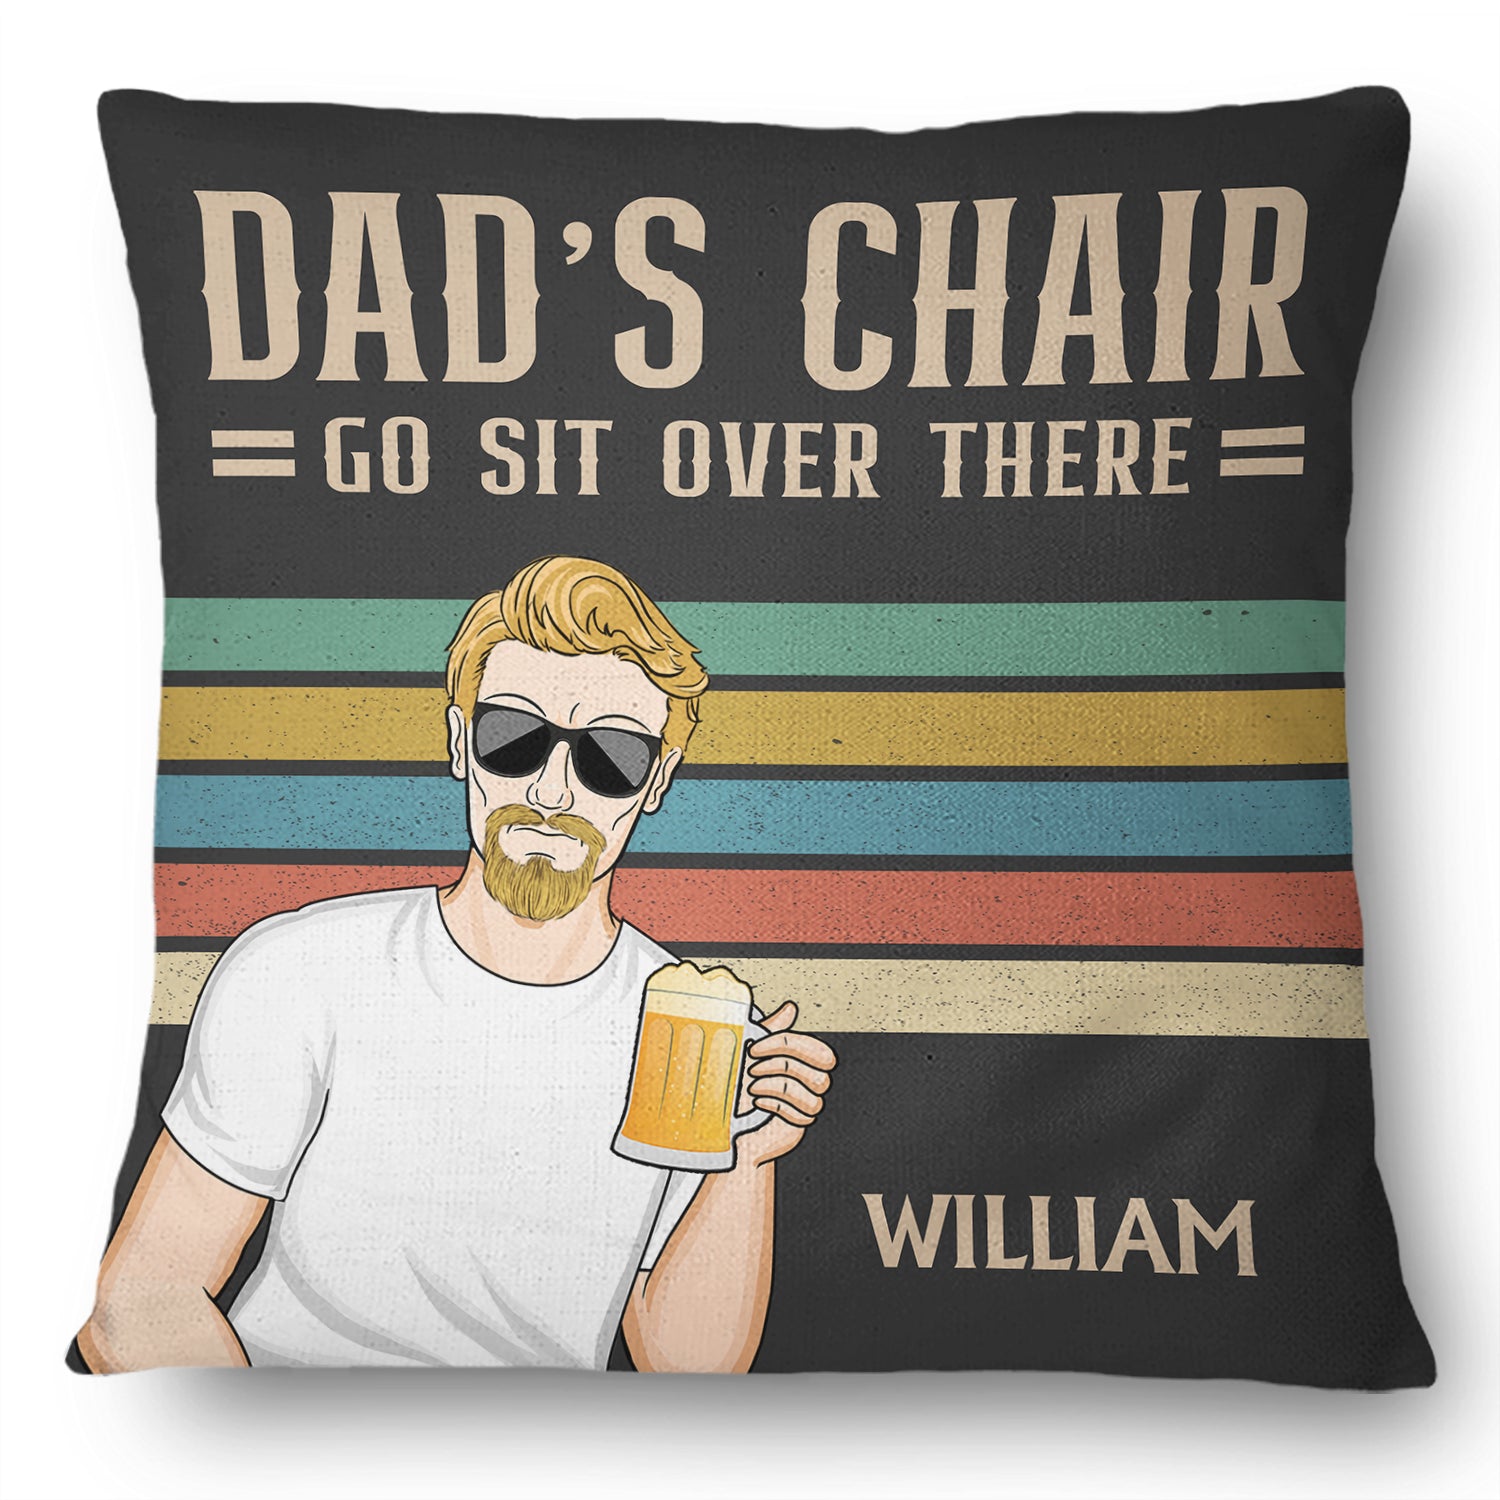 Dad's Chair Go Sit Over There - Funny, Birthday Gift For Father, Husband - Personalized Custom Pillow